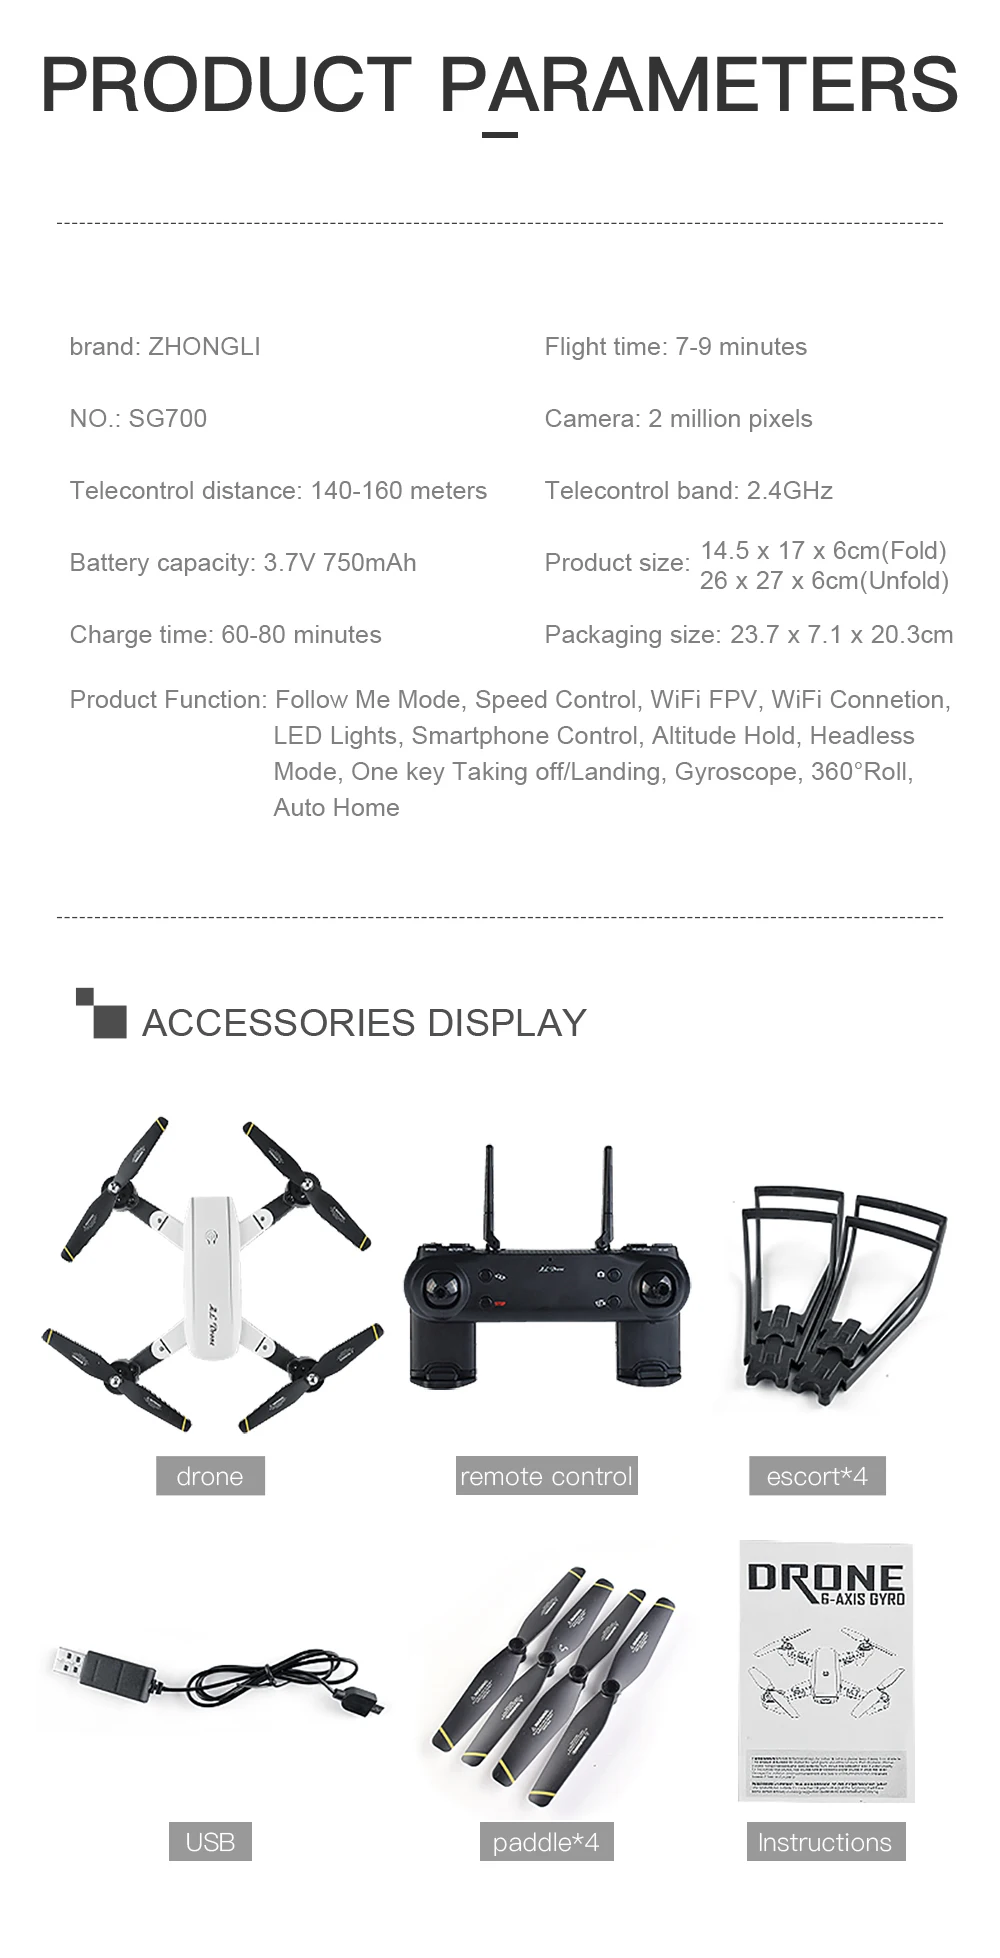 Michelangelo privilegeret Feje New Arrival Sg700 Drone With Camera Wifi Fpv Quadcopter Foldable Altitude  Hold Headless Rc Helicopter - Buy Sg700 Drone,Sg700 Drone,Sg700 Drone  Product on Alibaba.com